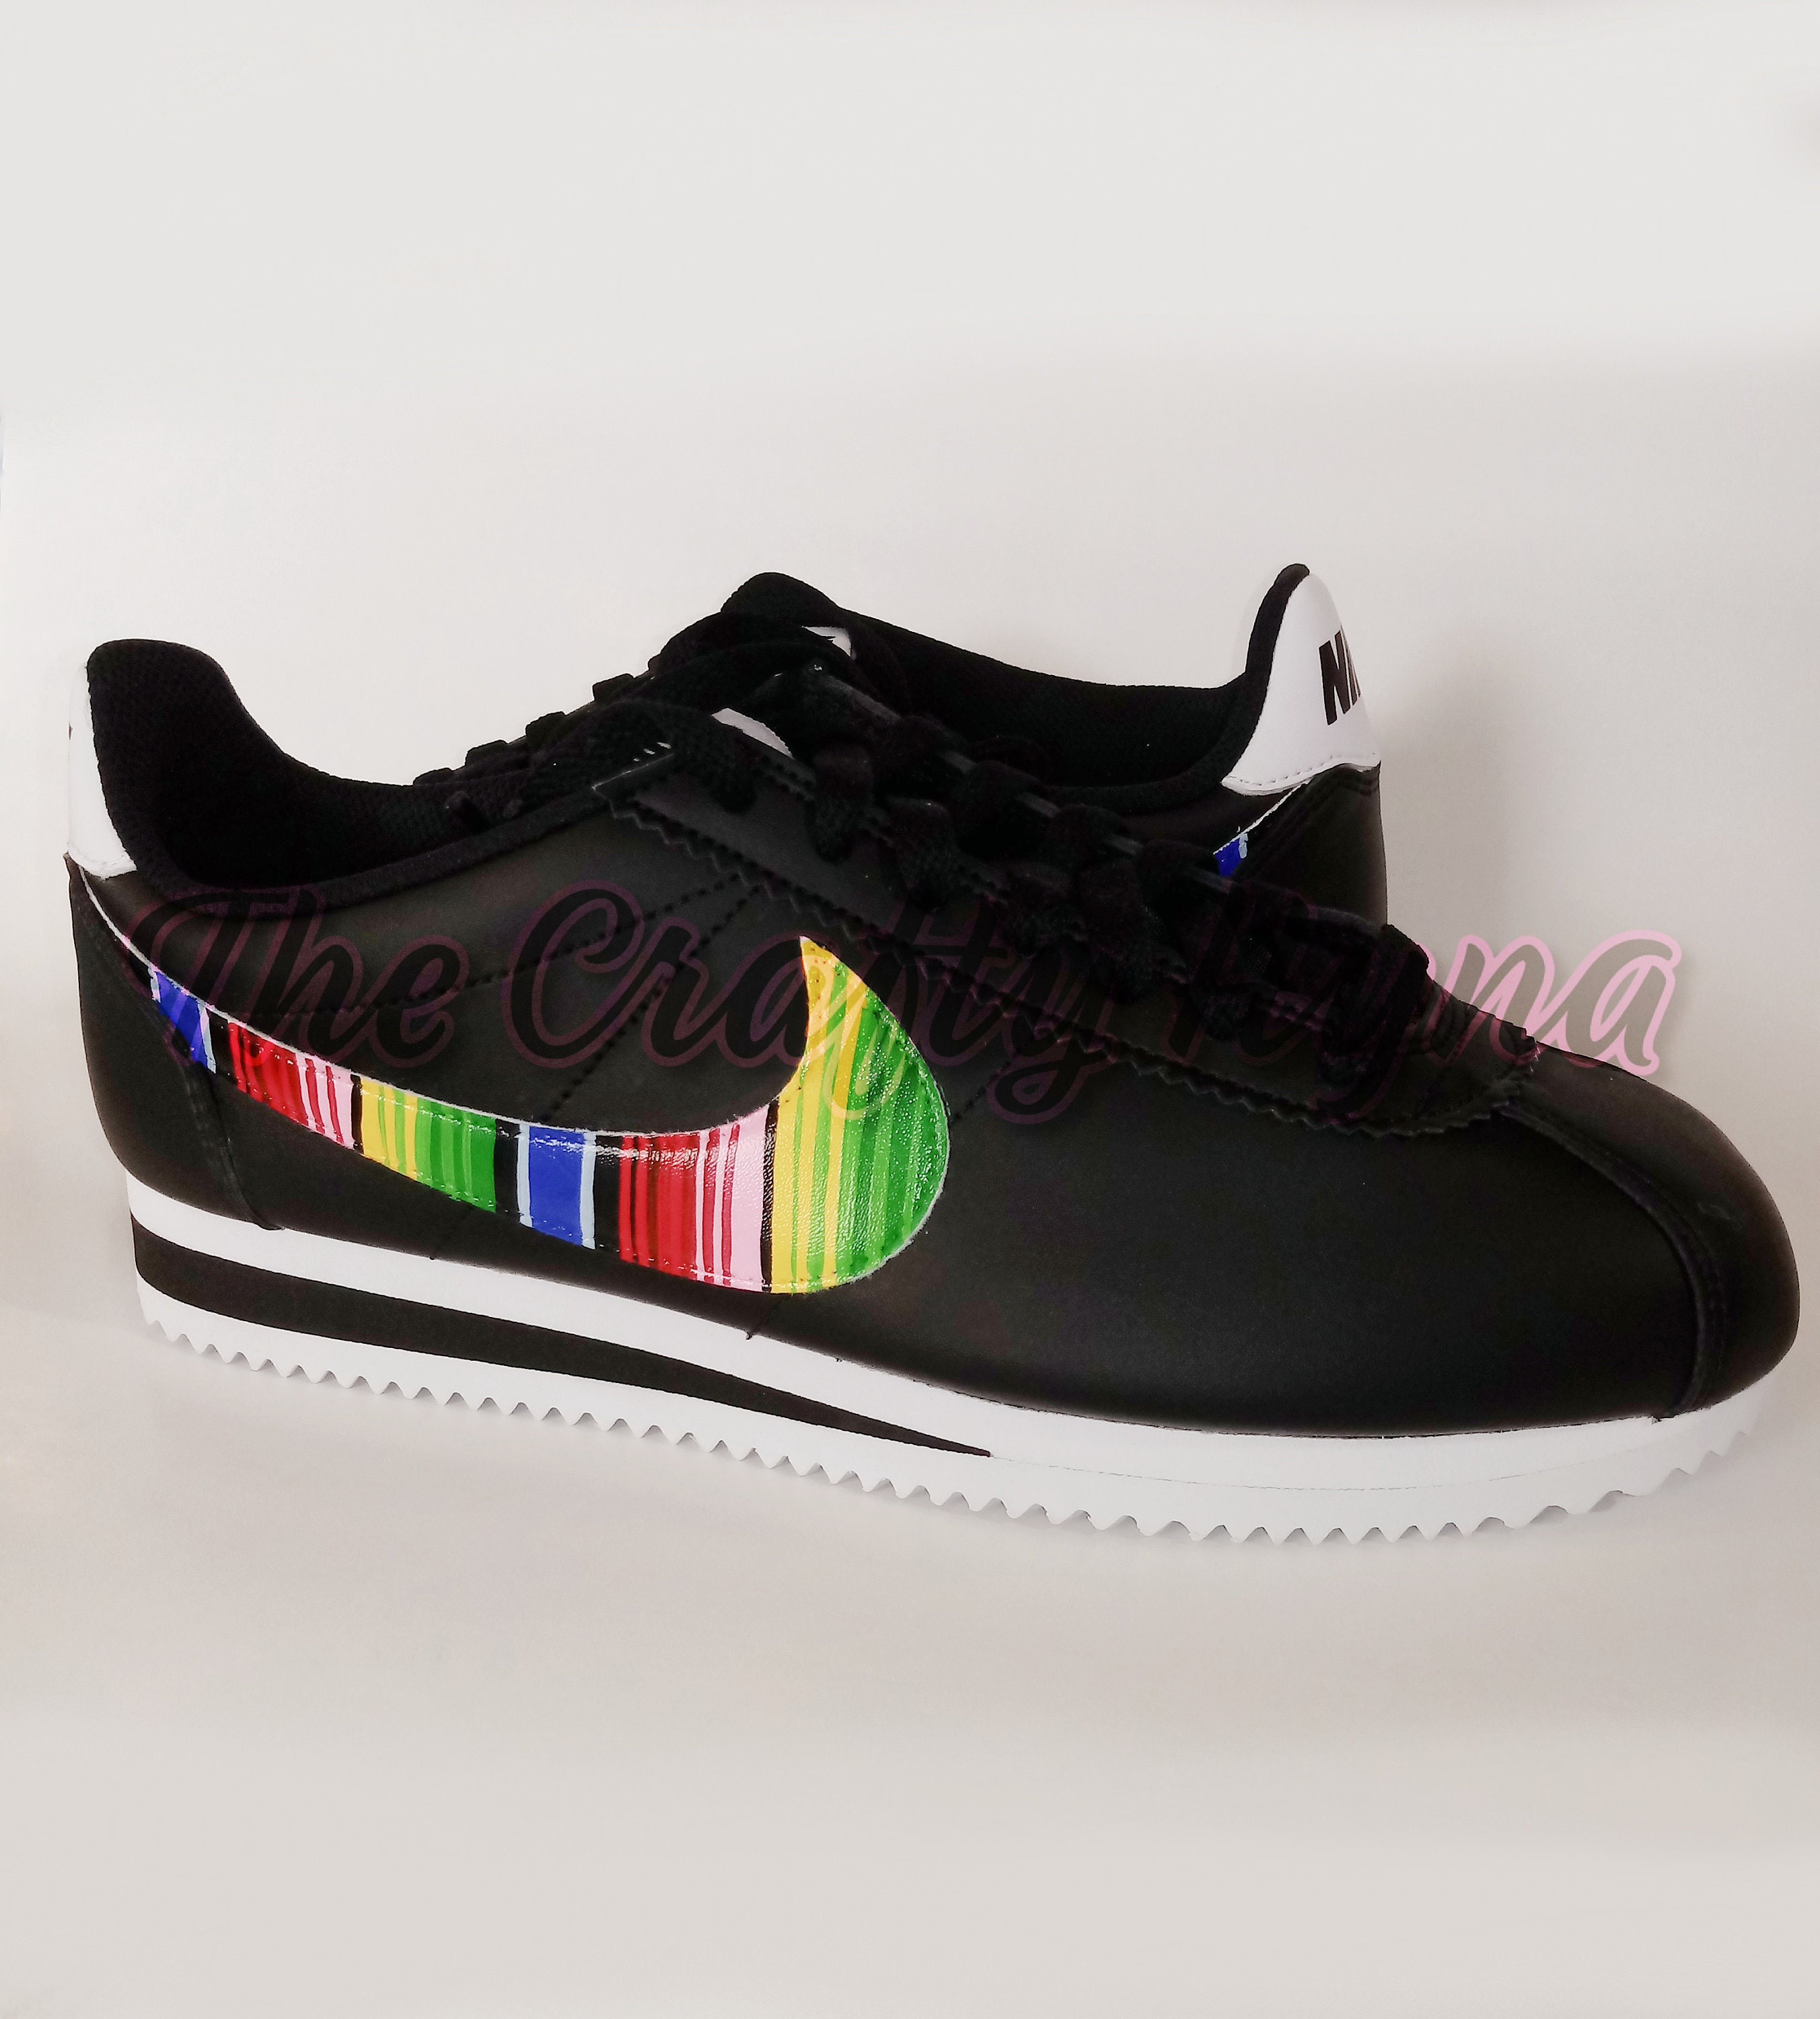 Nike Cortez Customized Painted Boondocks Shoes Mens 7.5 Womens 9 819719-110